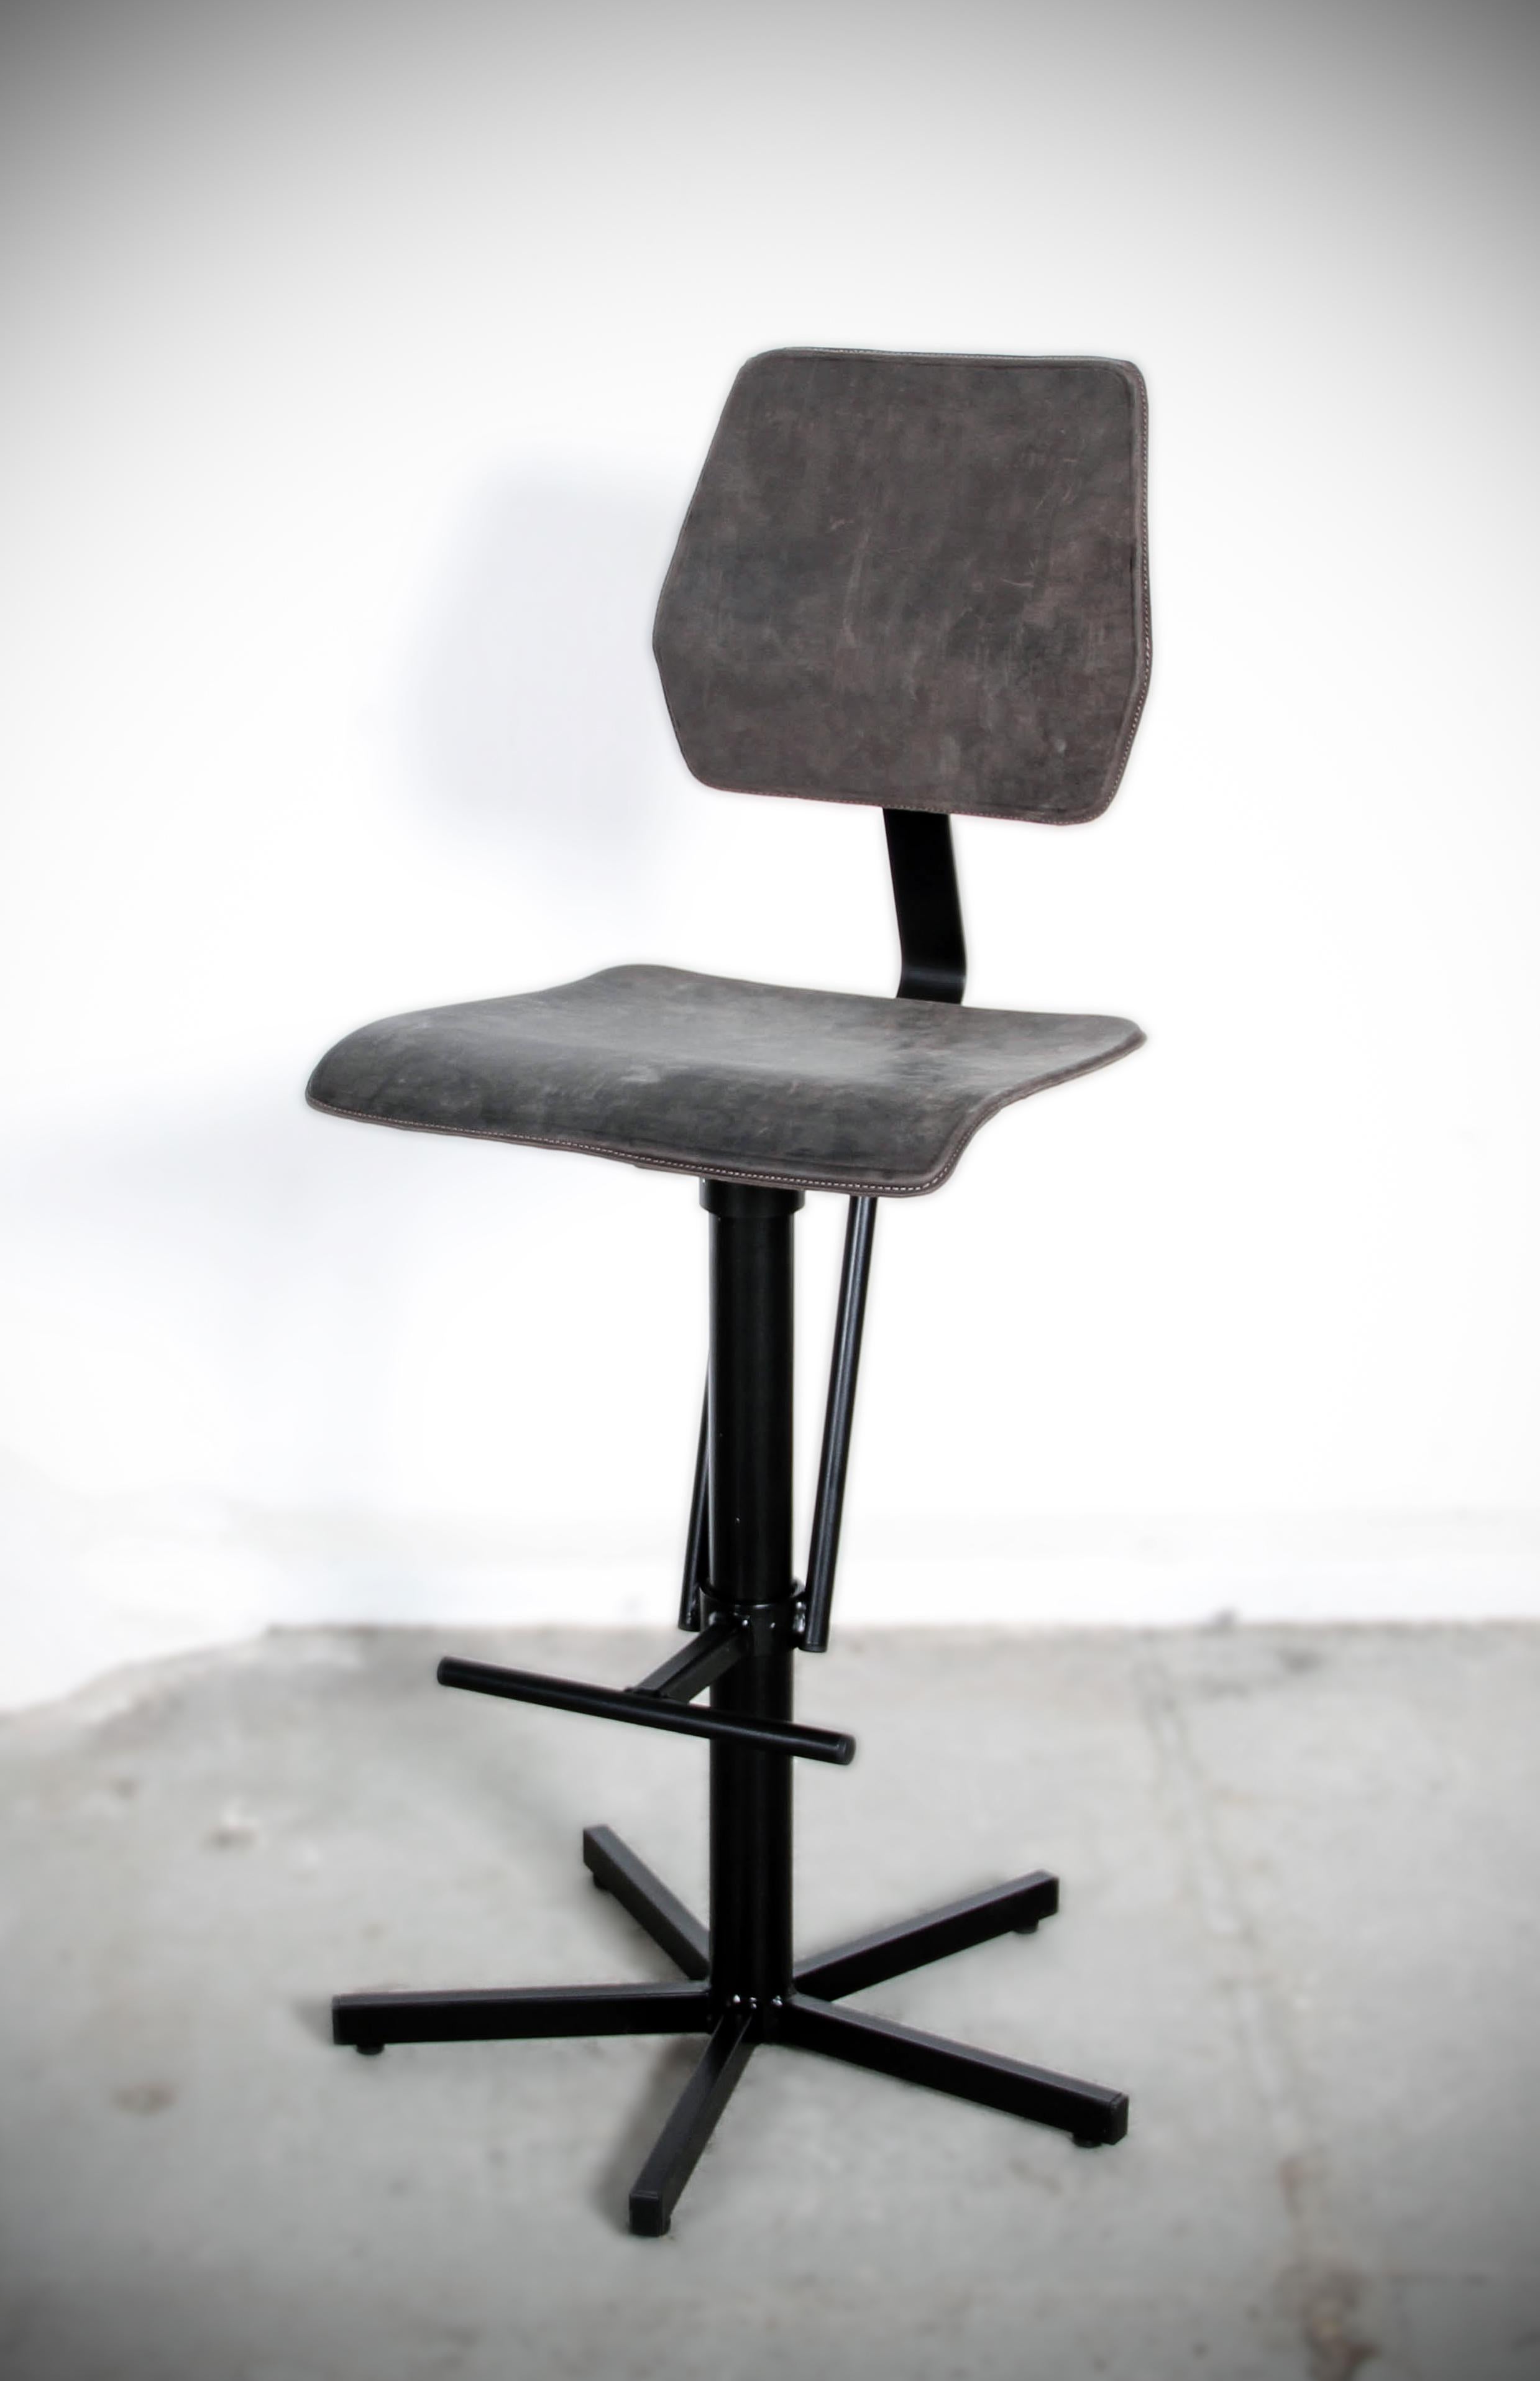 Kodak leather barstool by Jesse Sanderson
Artist: Jesse Sanderson
Material: Steel frame, Nubuck leather
Dimensions: 51 x 55 x 117 cm

Exploring antique markets, Jesse Sanderson got intrigued by a series of old factory chairs. They were made and